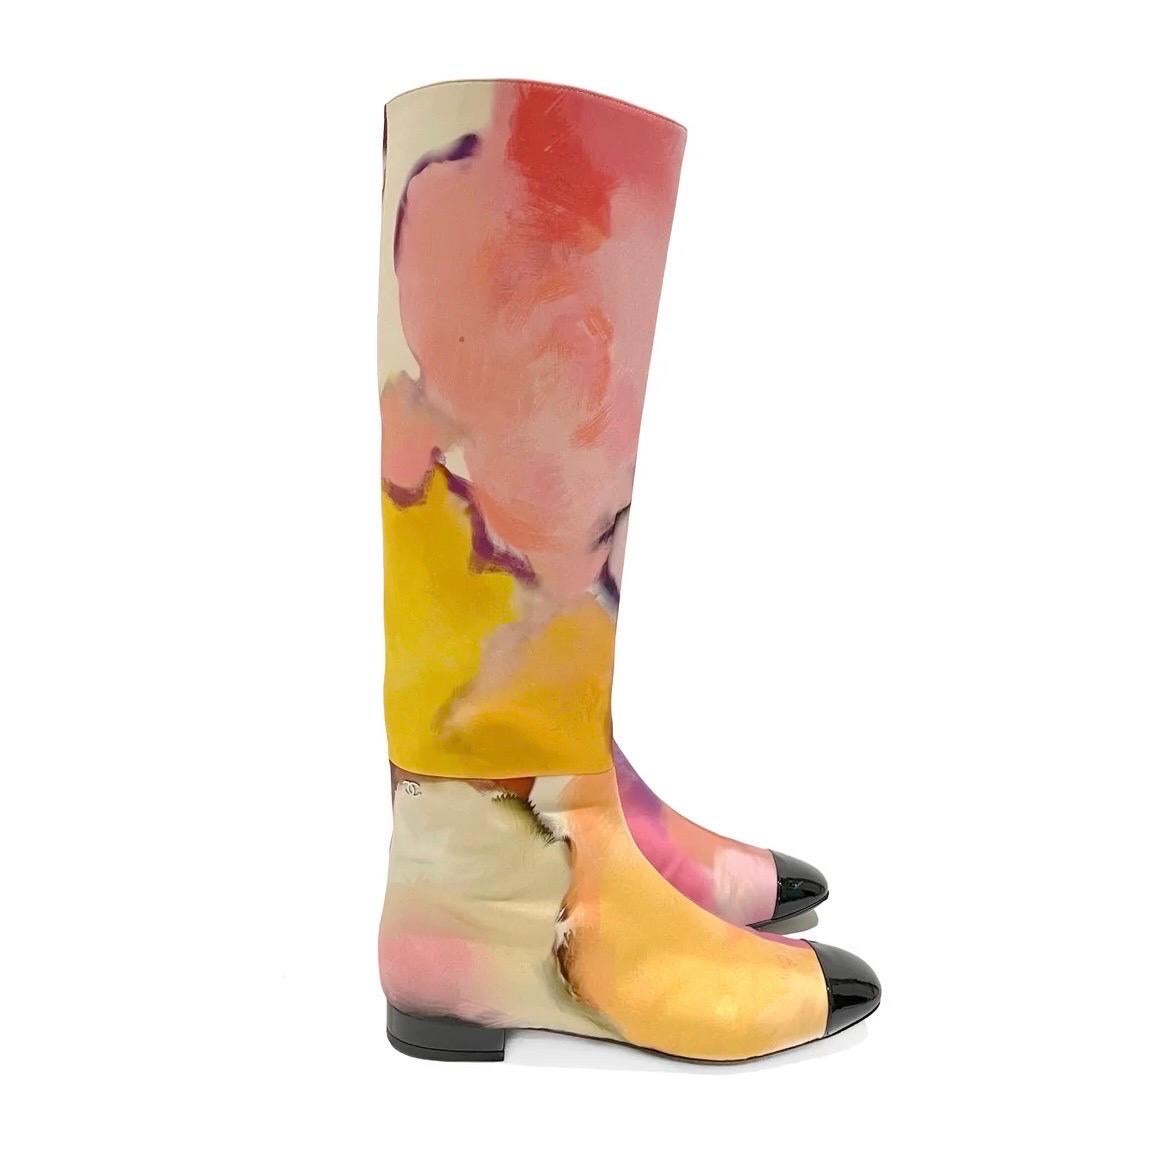 Watercolor Boots by Chanel 
Spring / Summer 2015
Made in Italy 
Pink, purple, yellow, white
Watercolor abstract print throughout
Rounded square toe
Black cap toe detail
Side zip closure
Excellent Condition; Preloved with light scuffing on the sole